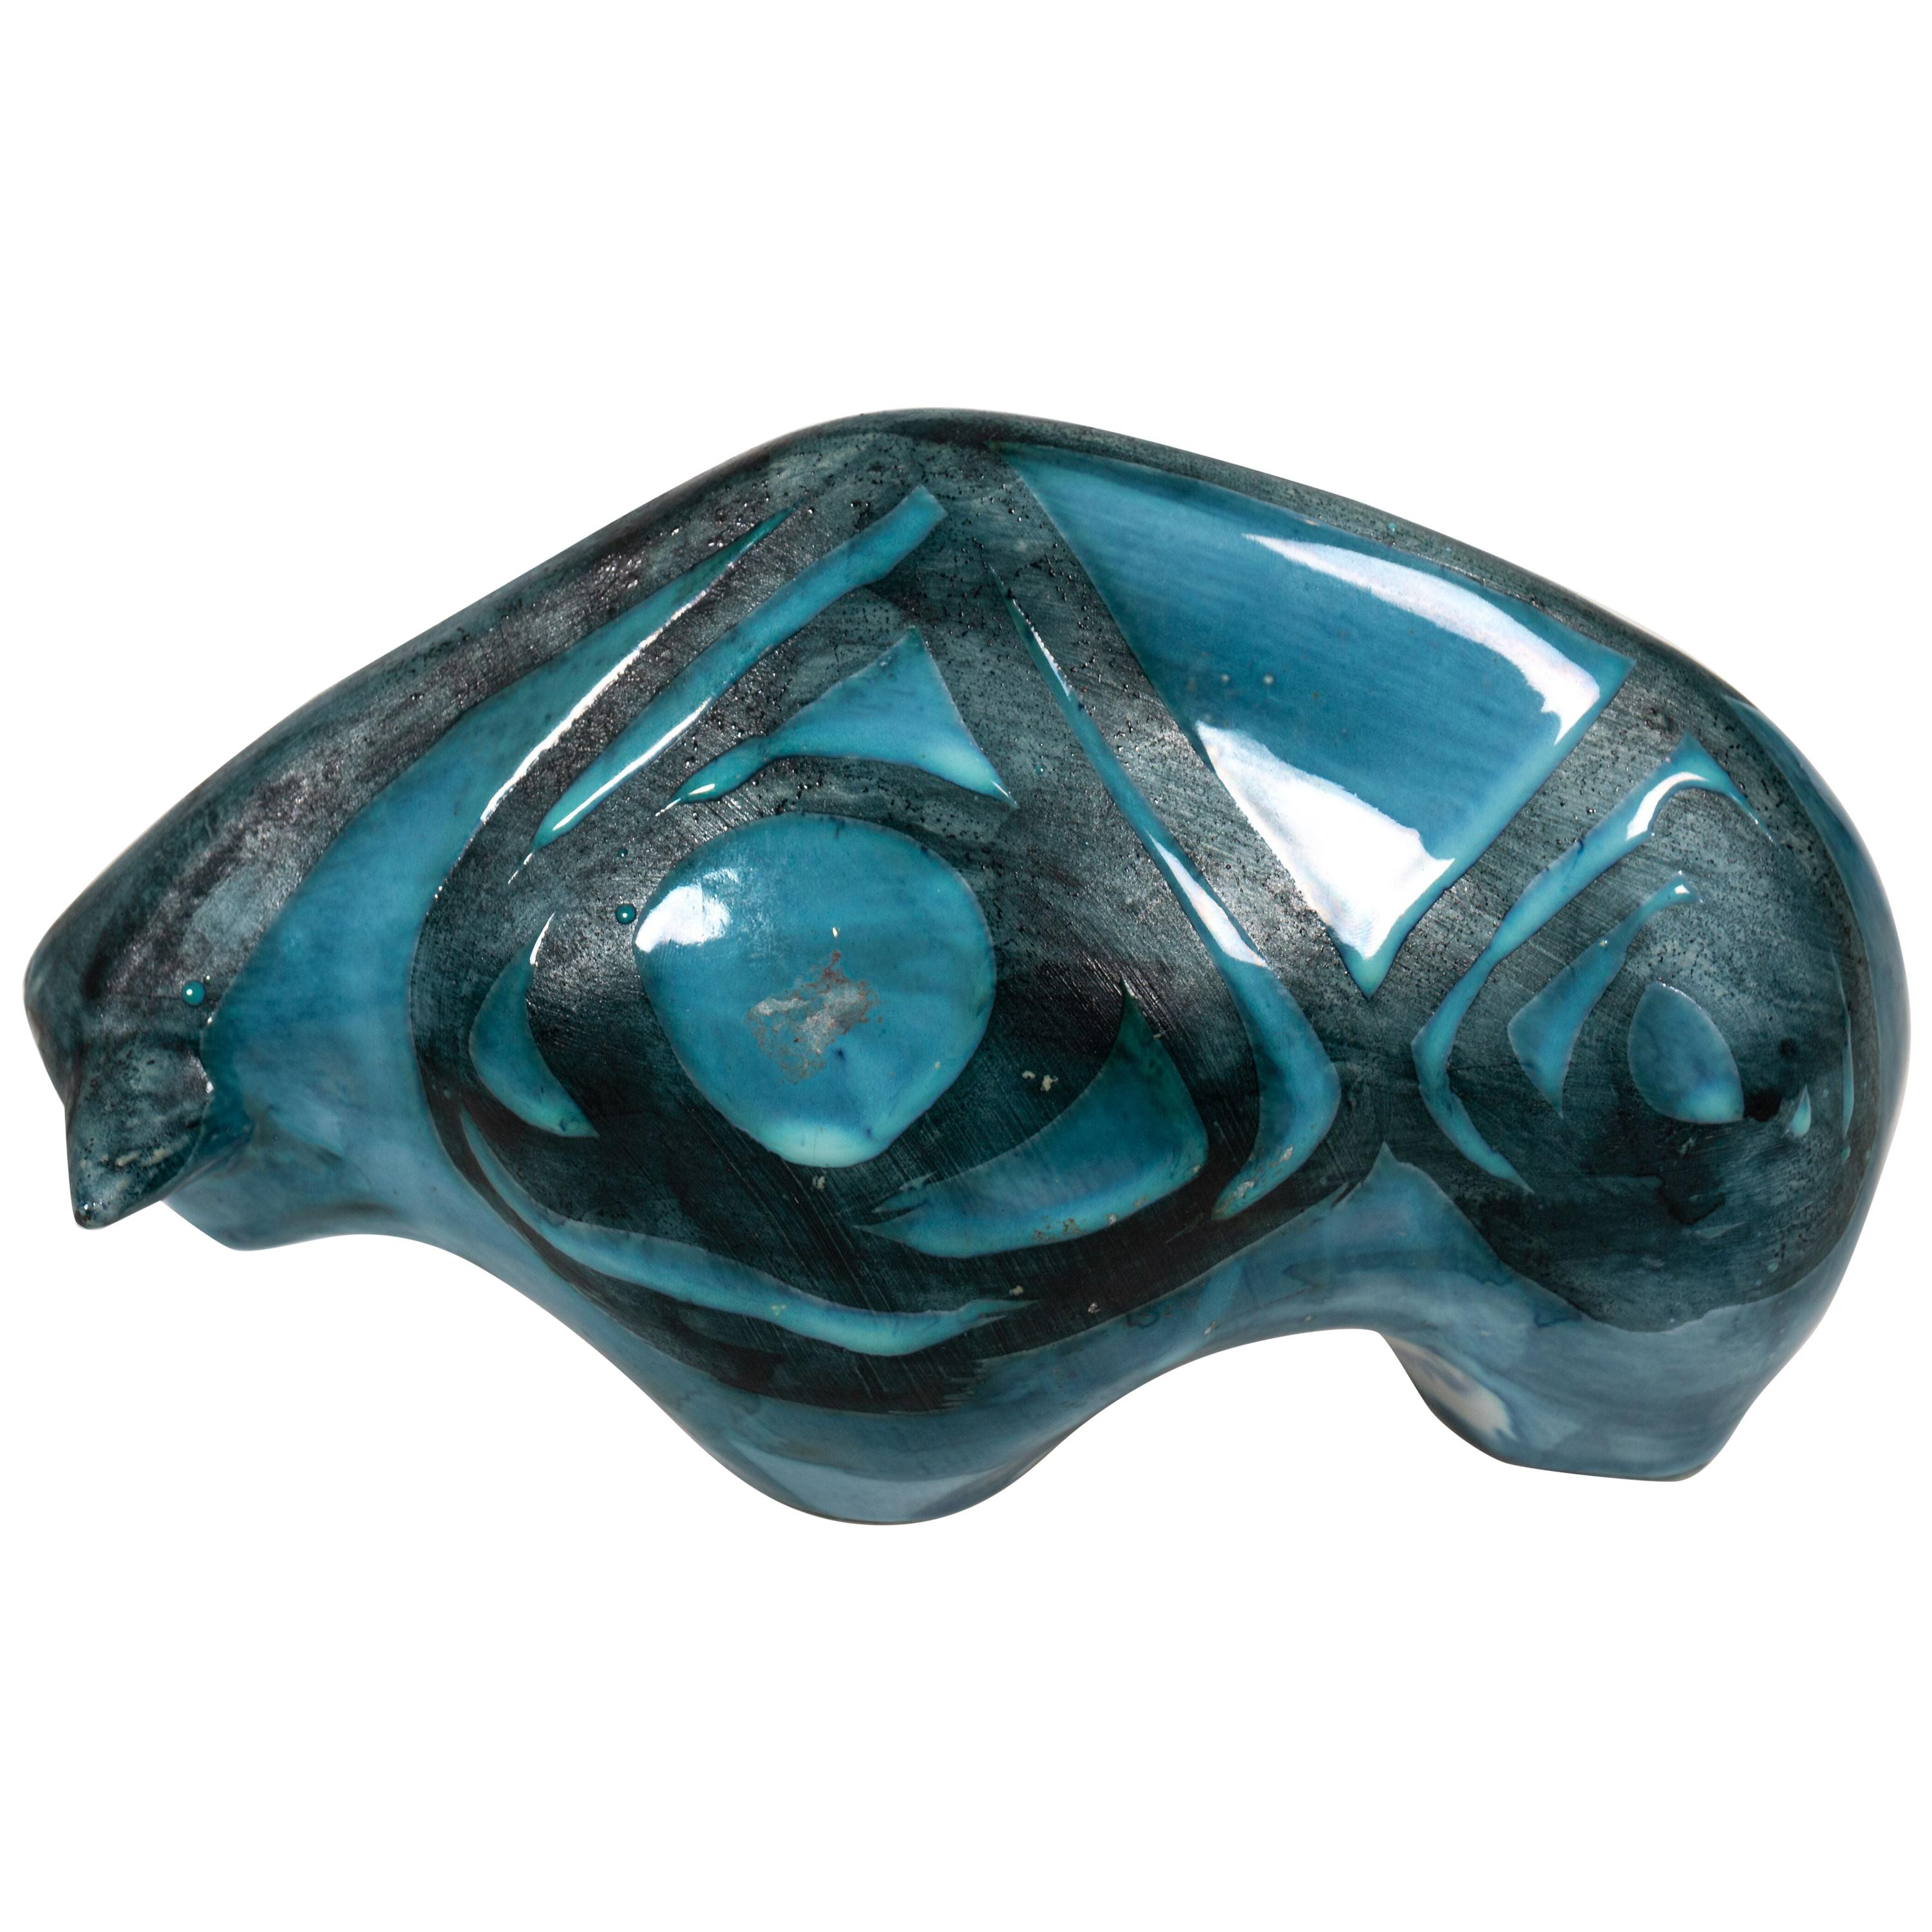 Modern Ceramic Bull with Abstract Blue Decor